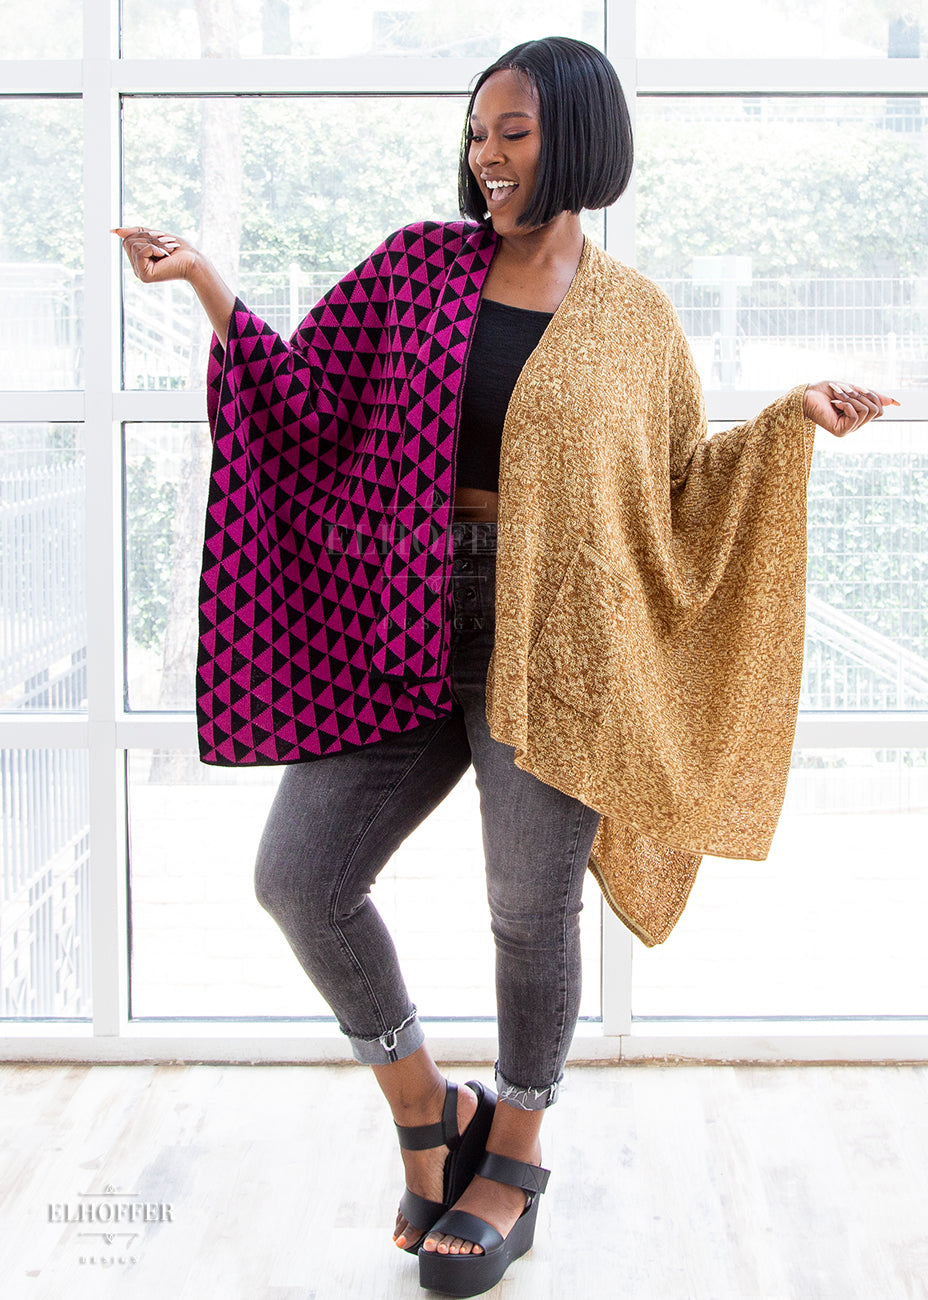 Lynsi stands, holding her arms in a shrug with a smile on her face, showing the poncho across her arms. The right side of the poncho has pink and black triangles and the left side is a golden mixed knit.